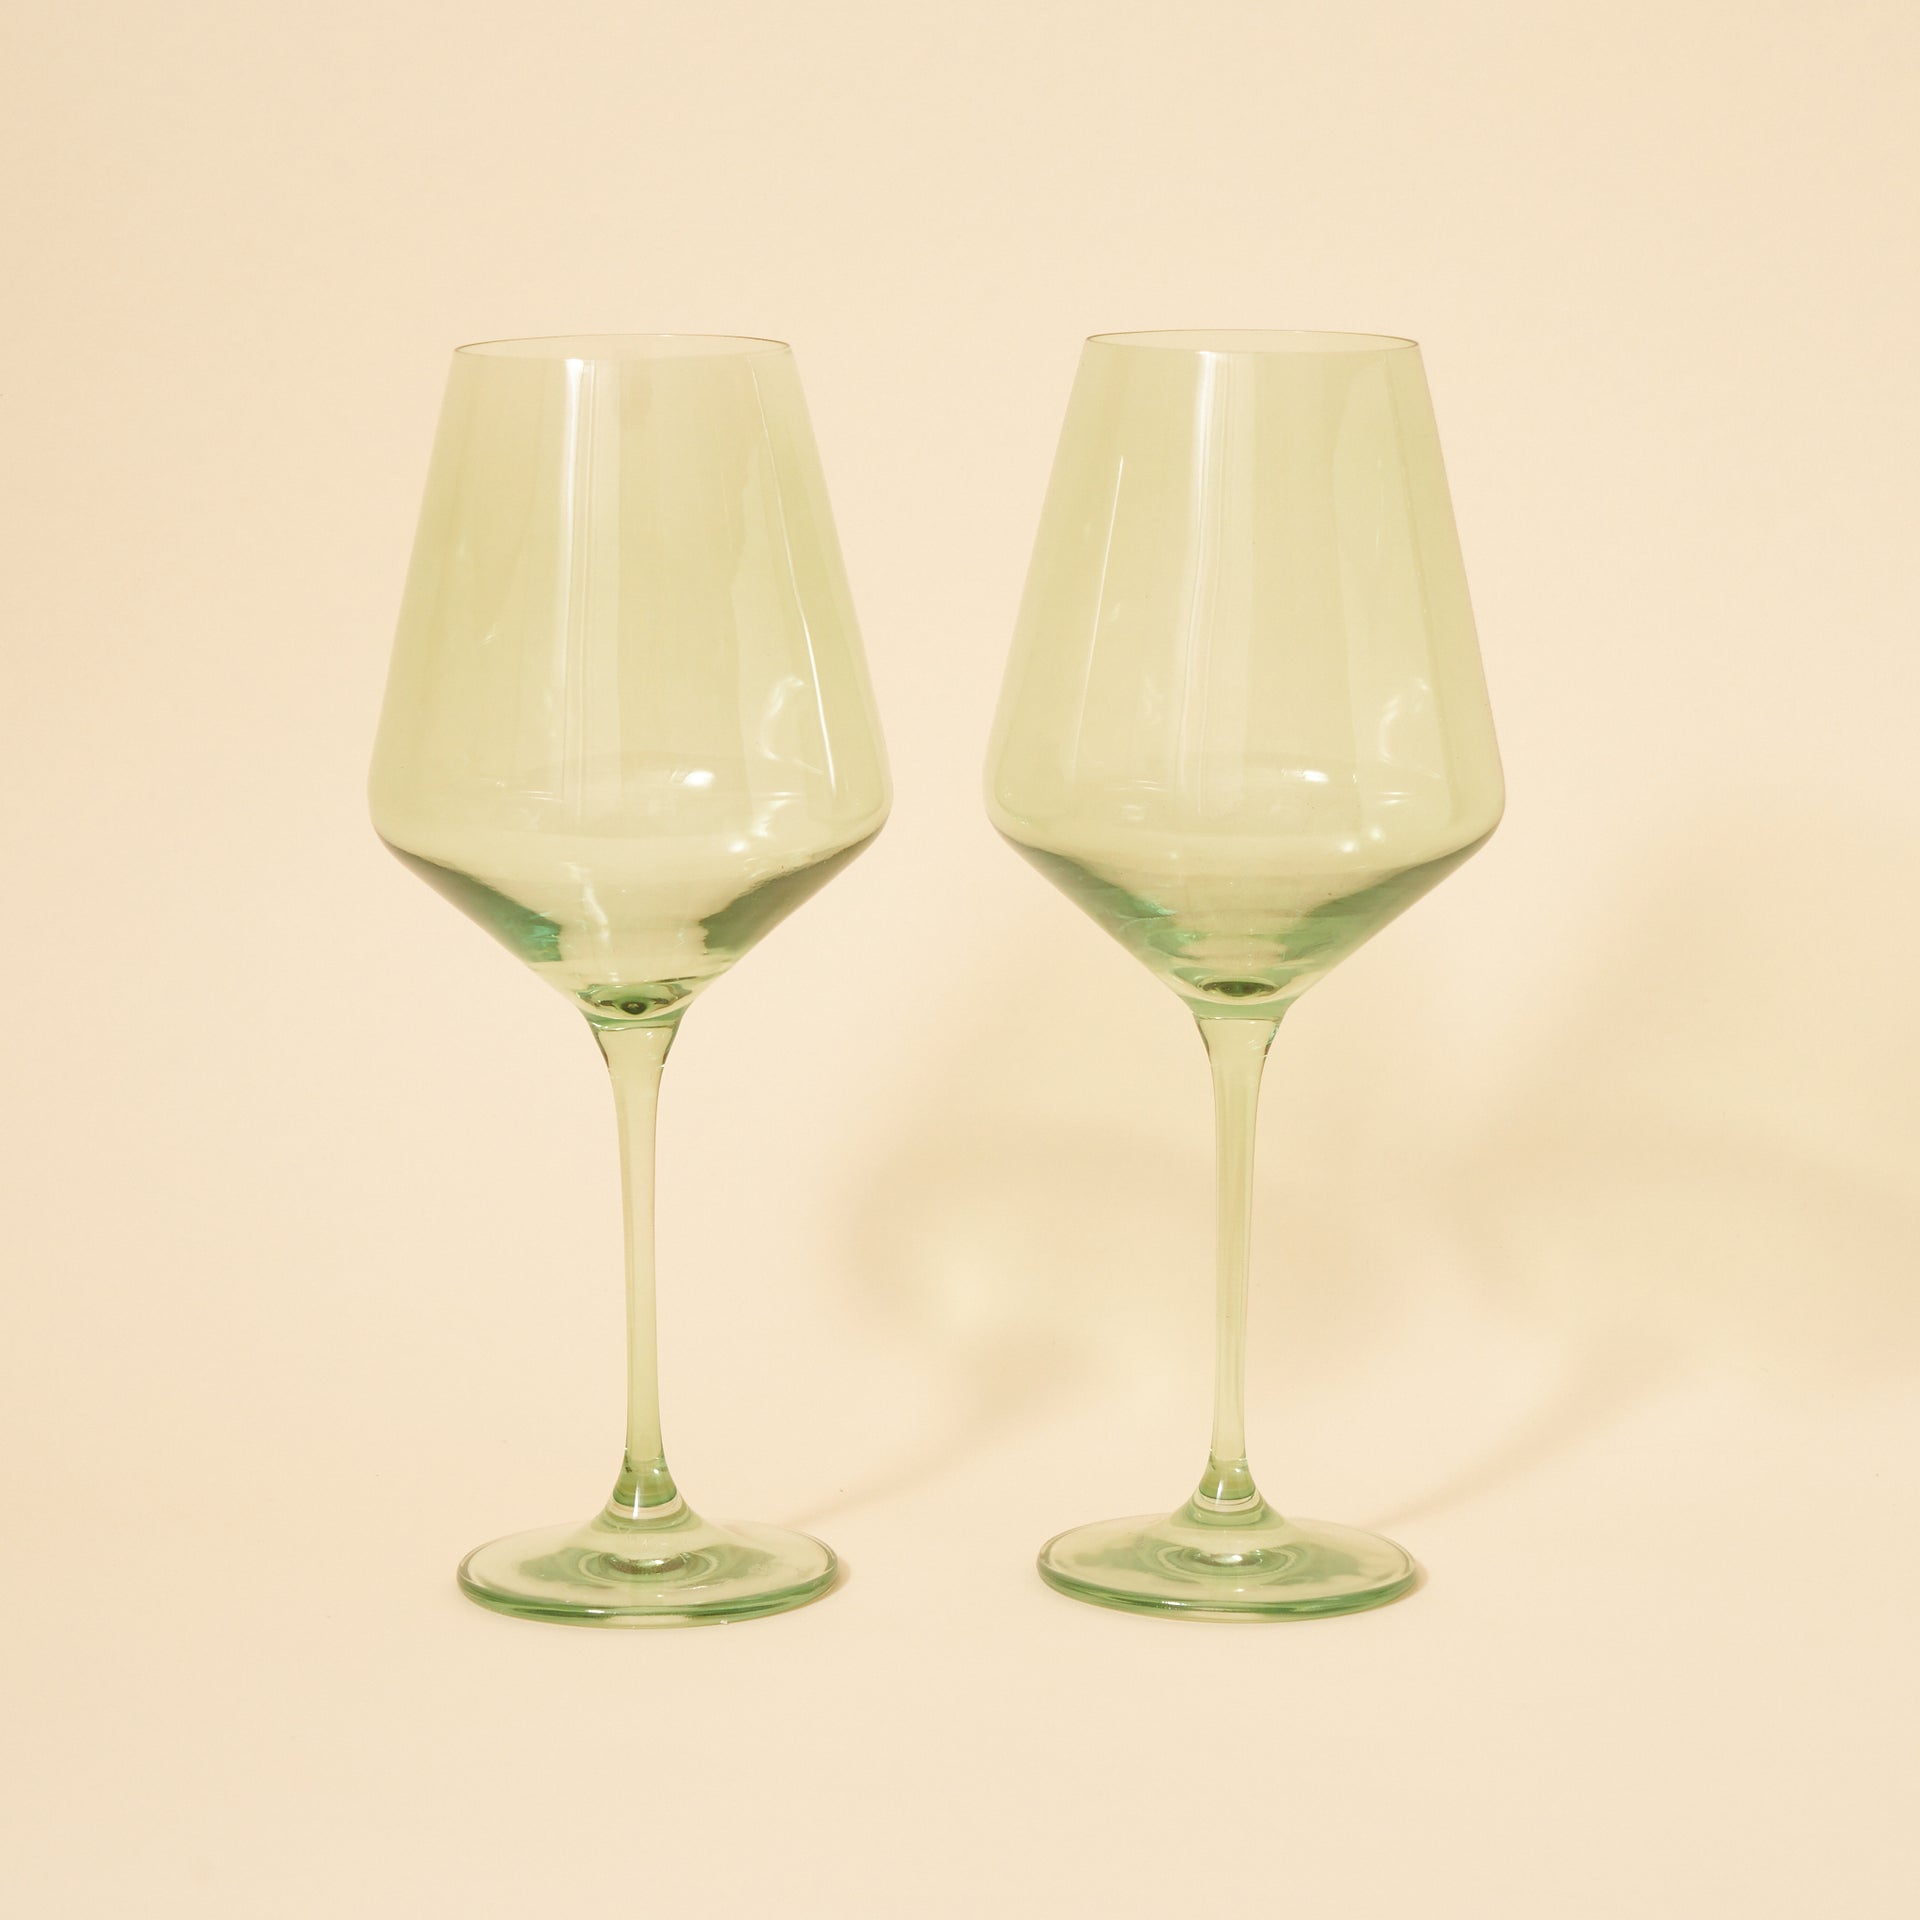 Stemware by Estelle Colored Glass - Set of 2